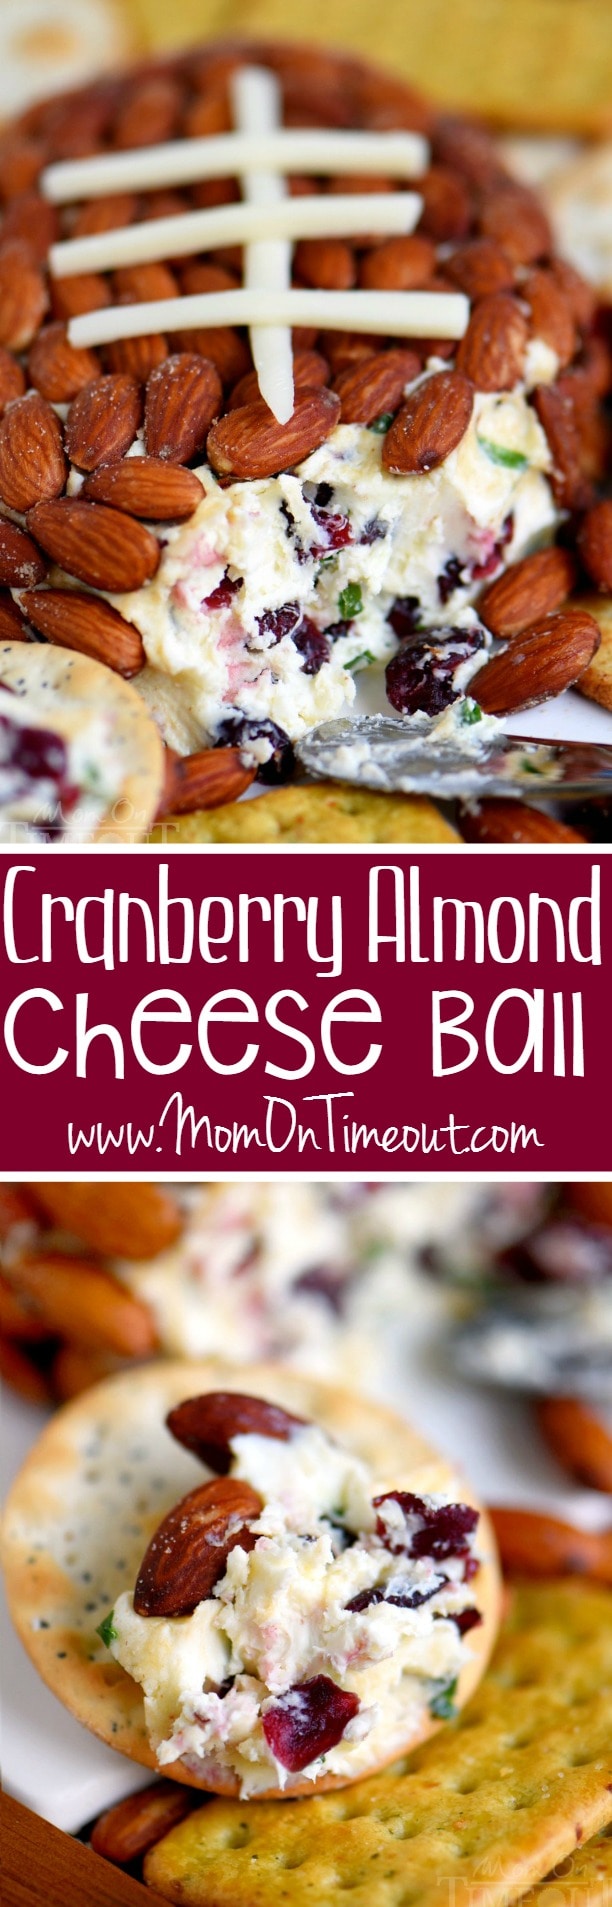 Get ready to impress with this unbelievably delicious Cranberry Almond Cheese Ball - made with just FIVE ingredients! This easy recipe is great for entertaining and parties!